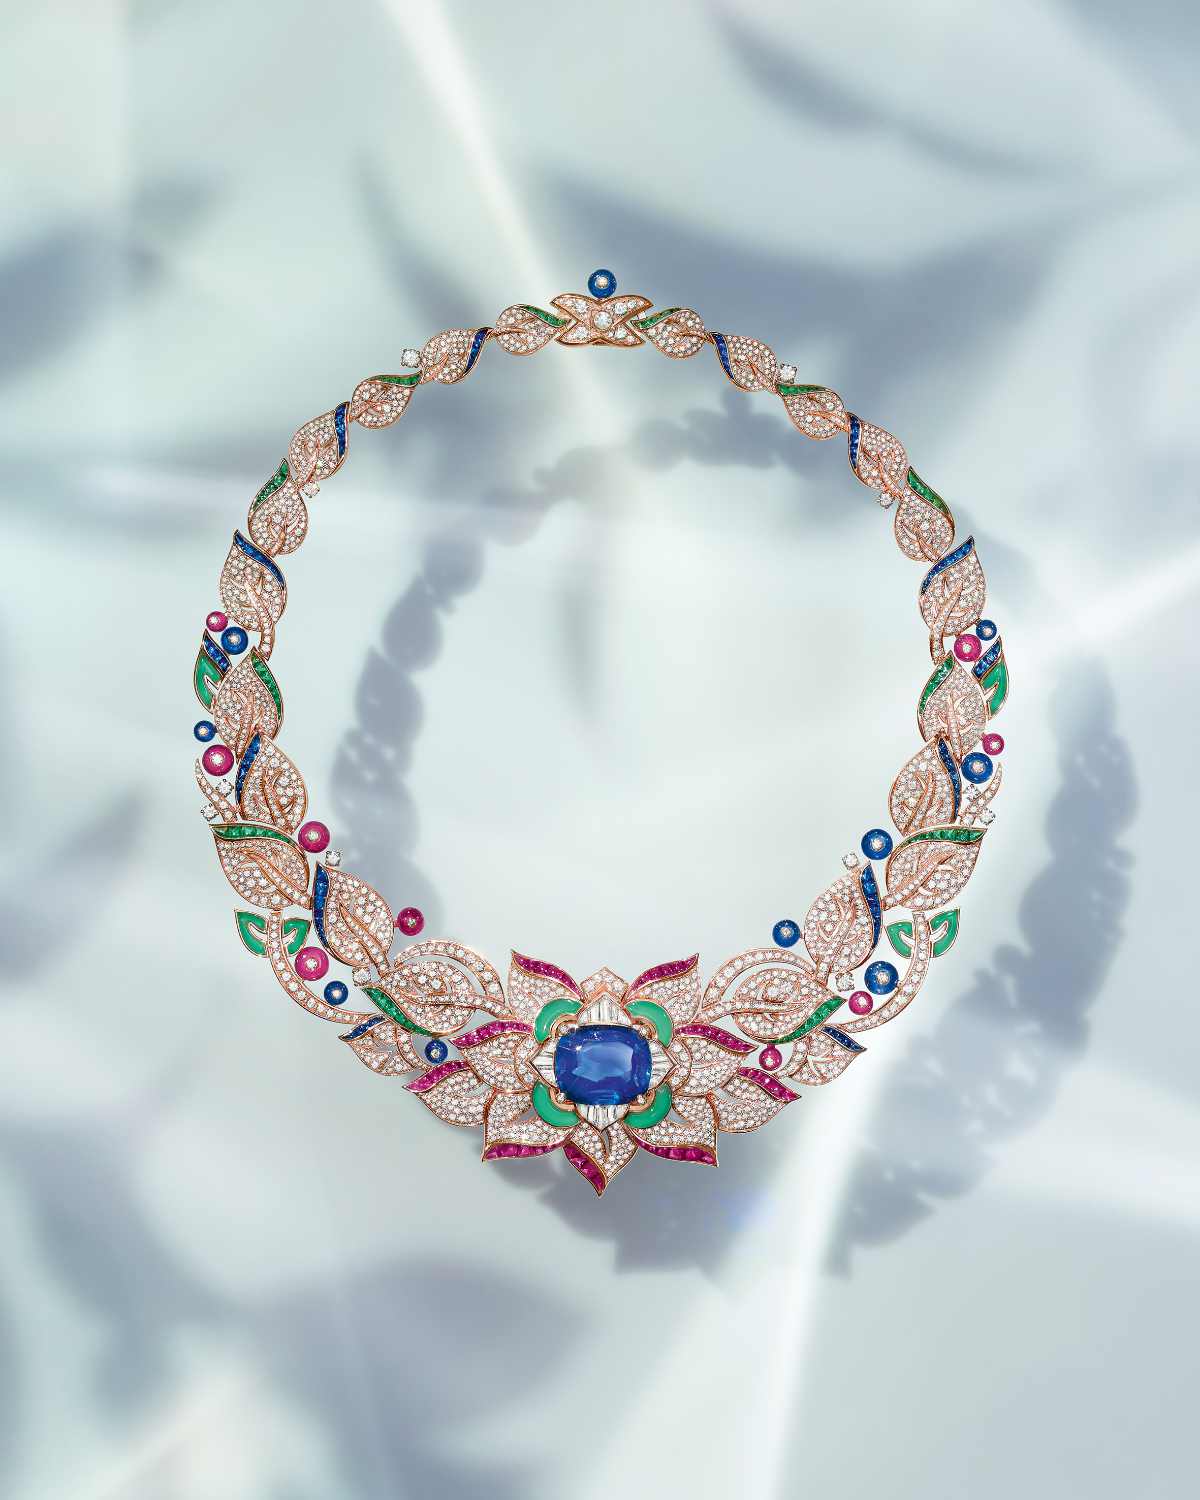 Bulgari Launches Its New High Jewelry And High-End Watches Collection: Eden The Garden Of Wonders